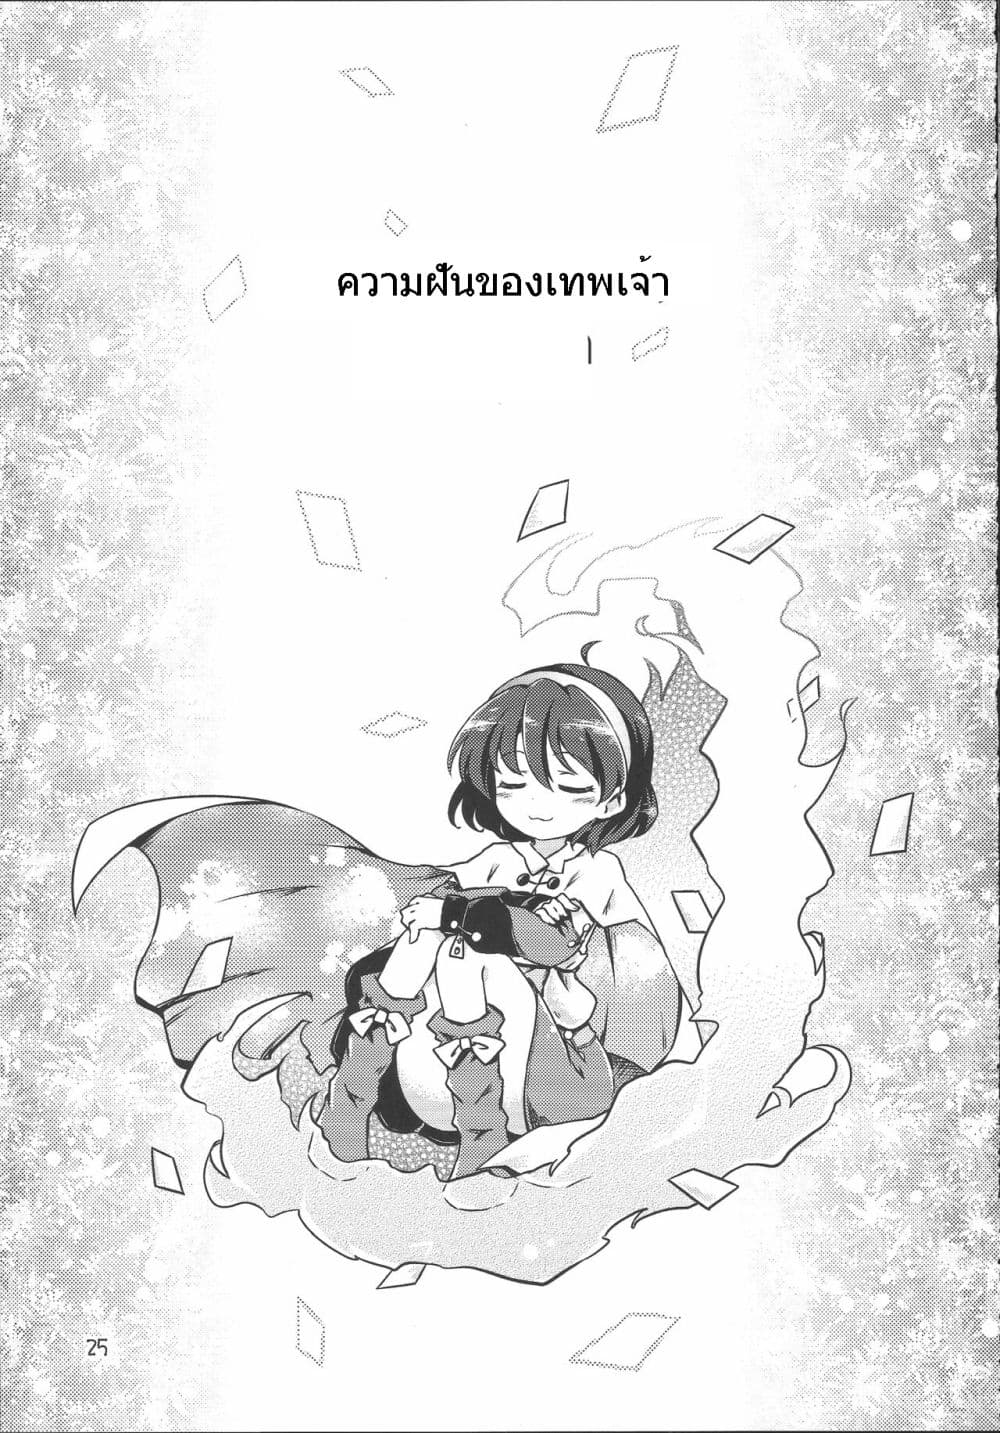 Touhou Project Chima Book By Pote ตอนที่ 1 (24)